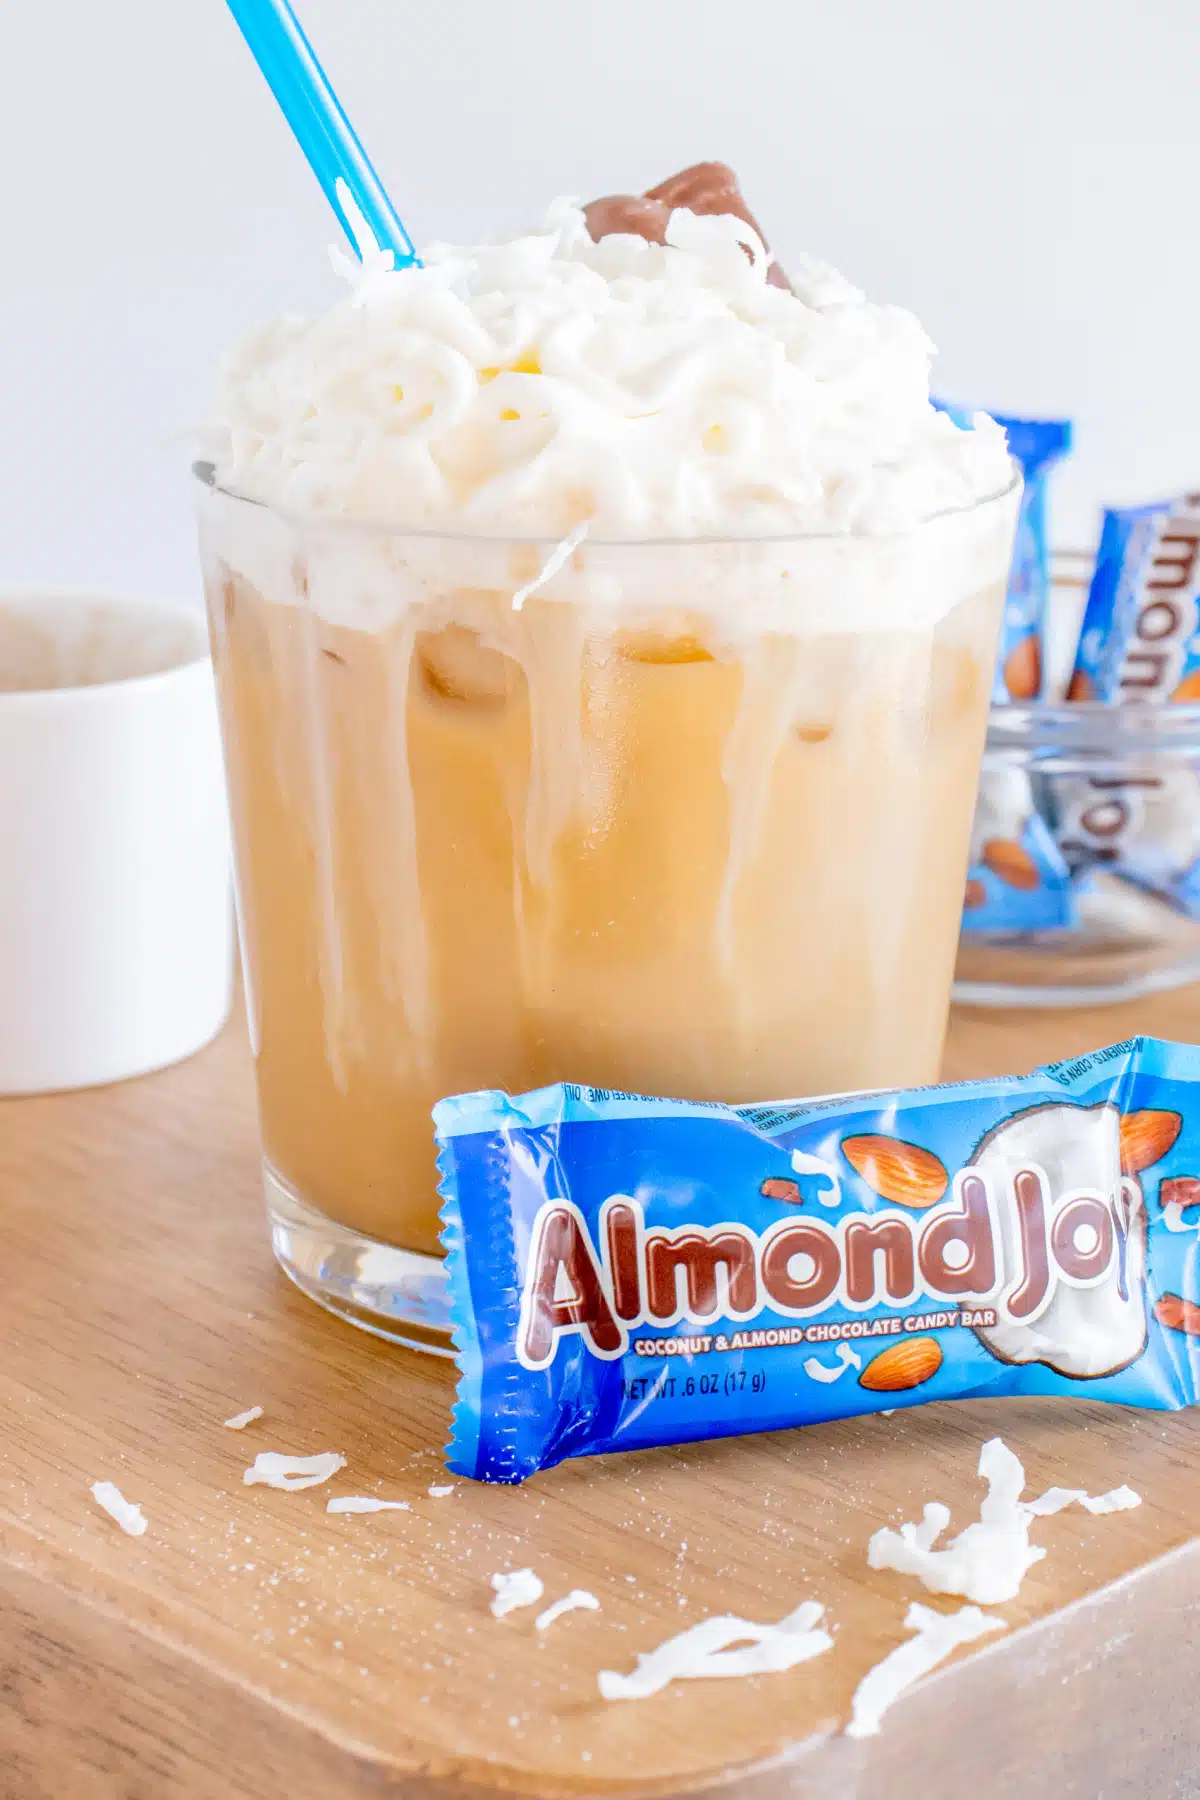 iced almond joy latte with candy bar